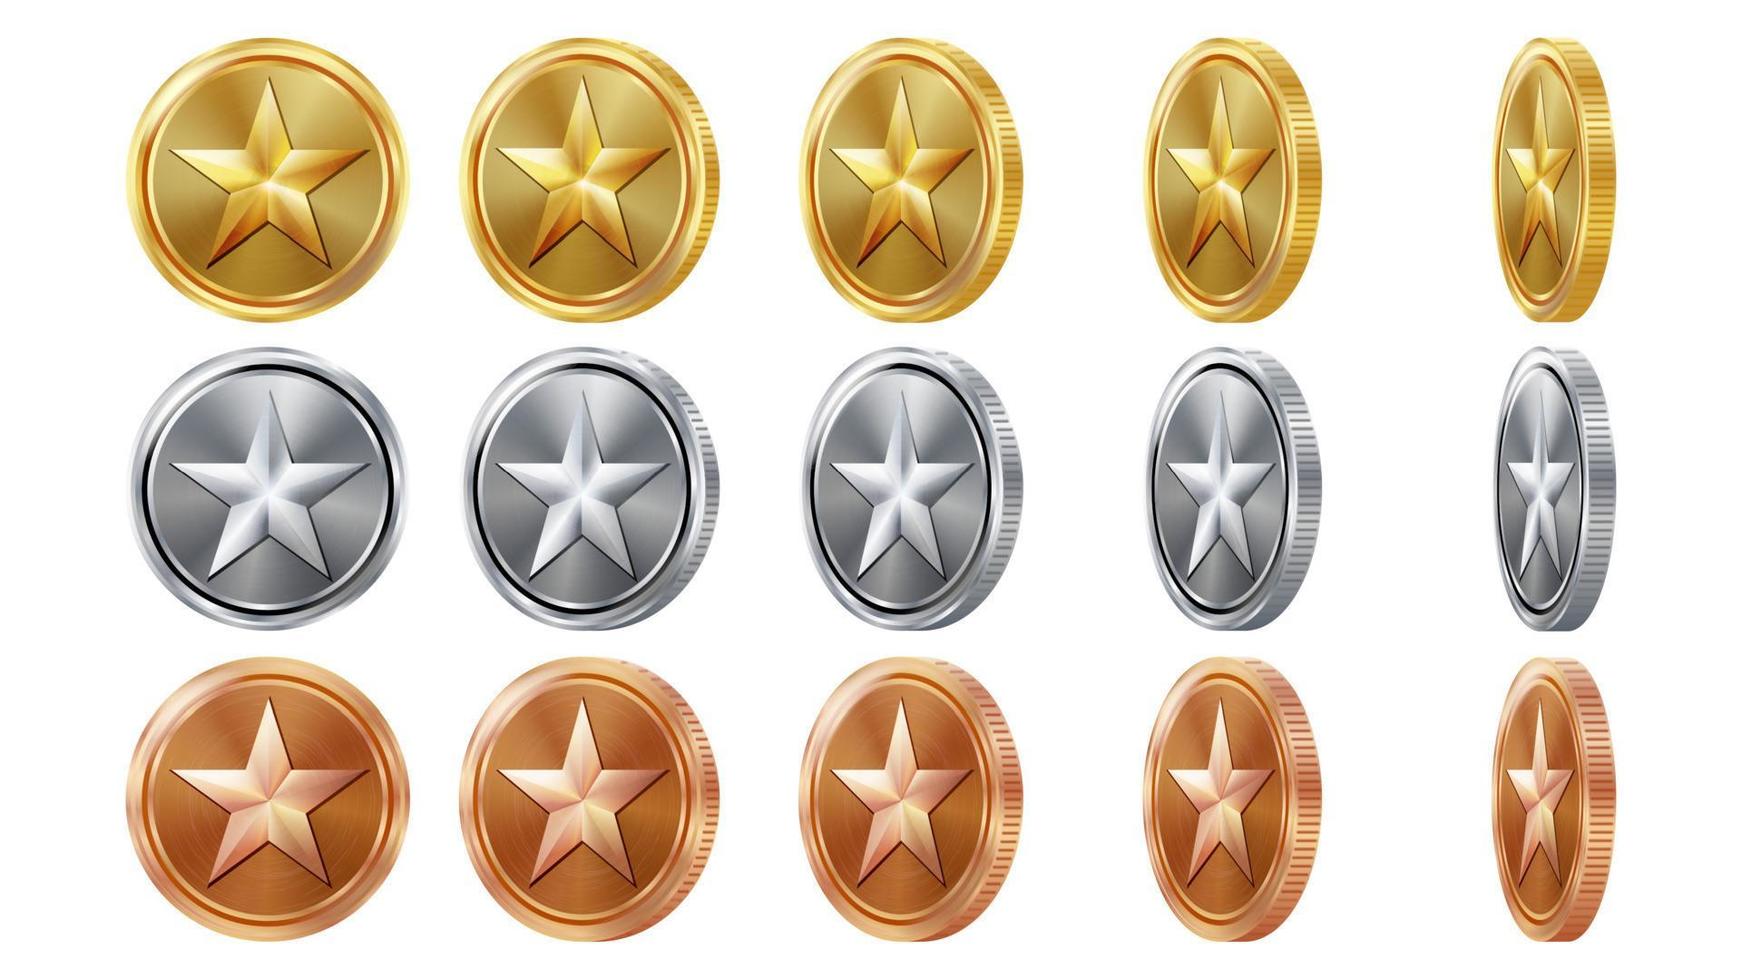 Game 3D Gold, Silver, Bronze Coins Set Vector With Star. Flip Different Angles. Achievement Coin Icons, Sign, Success, Winner, Bonus, Cash Symbol. Illustration Isolated. For Web, Game App Interface